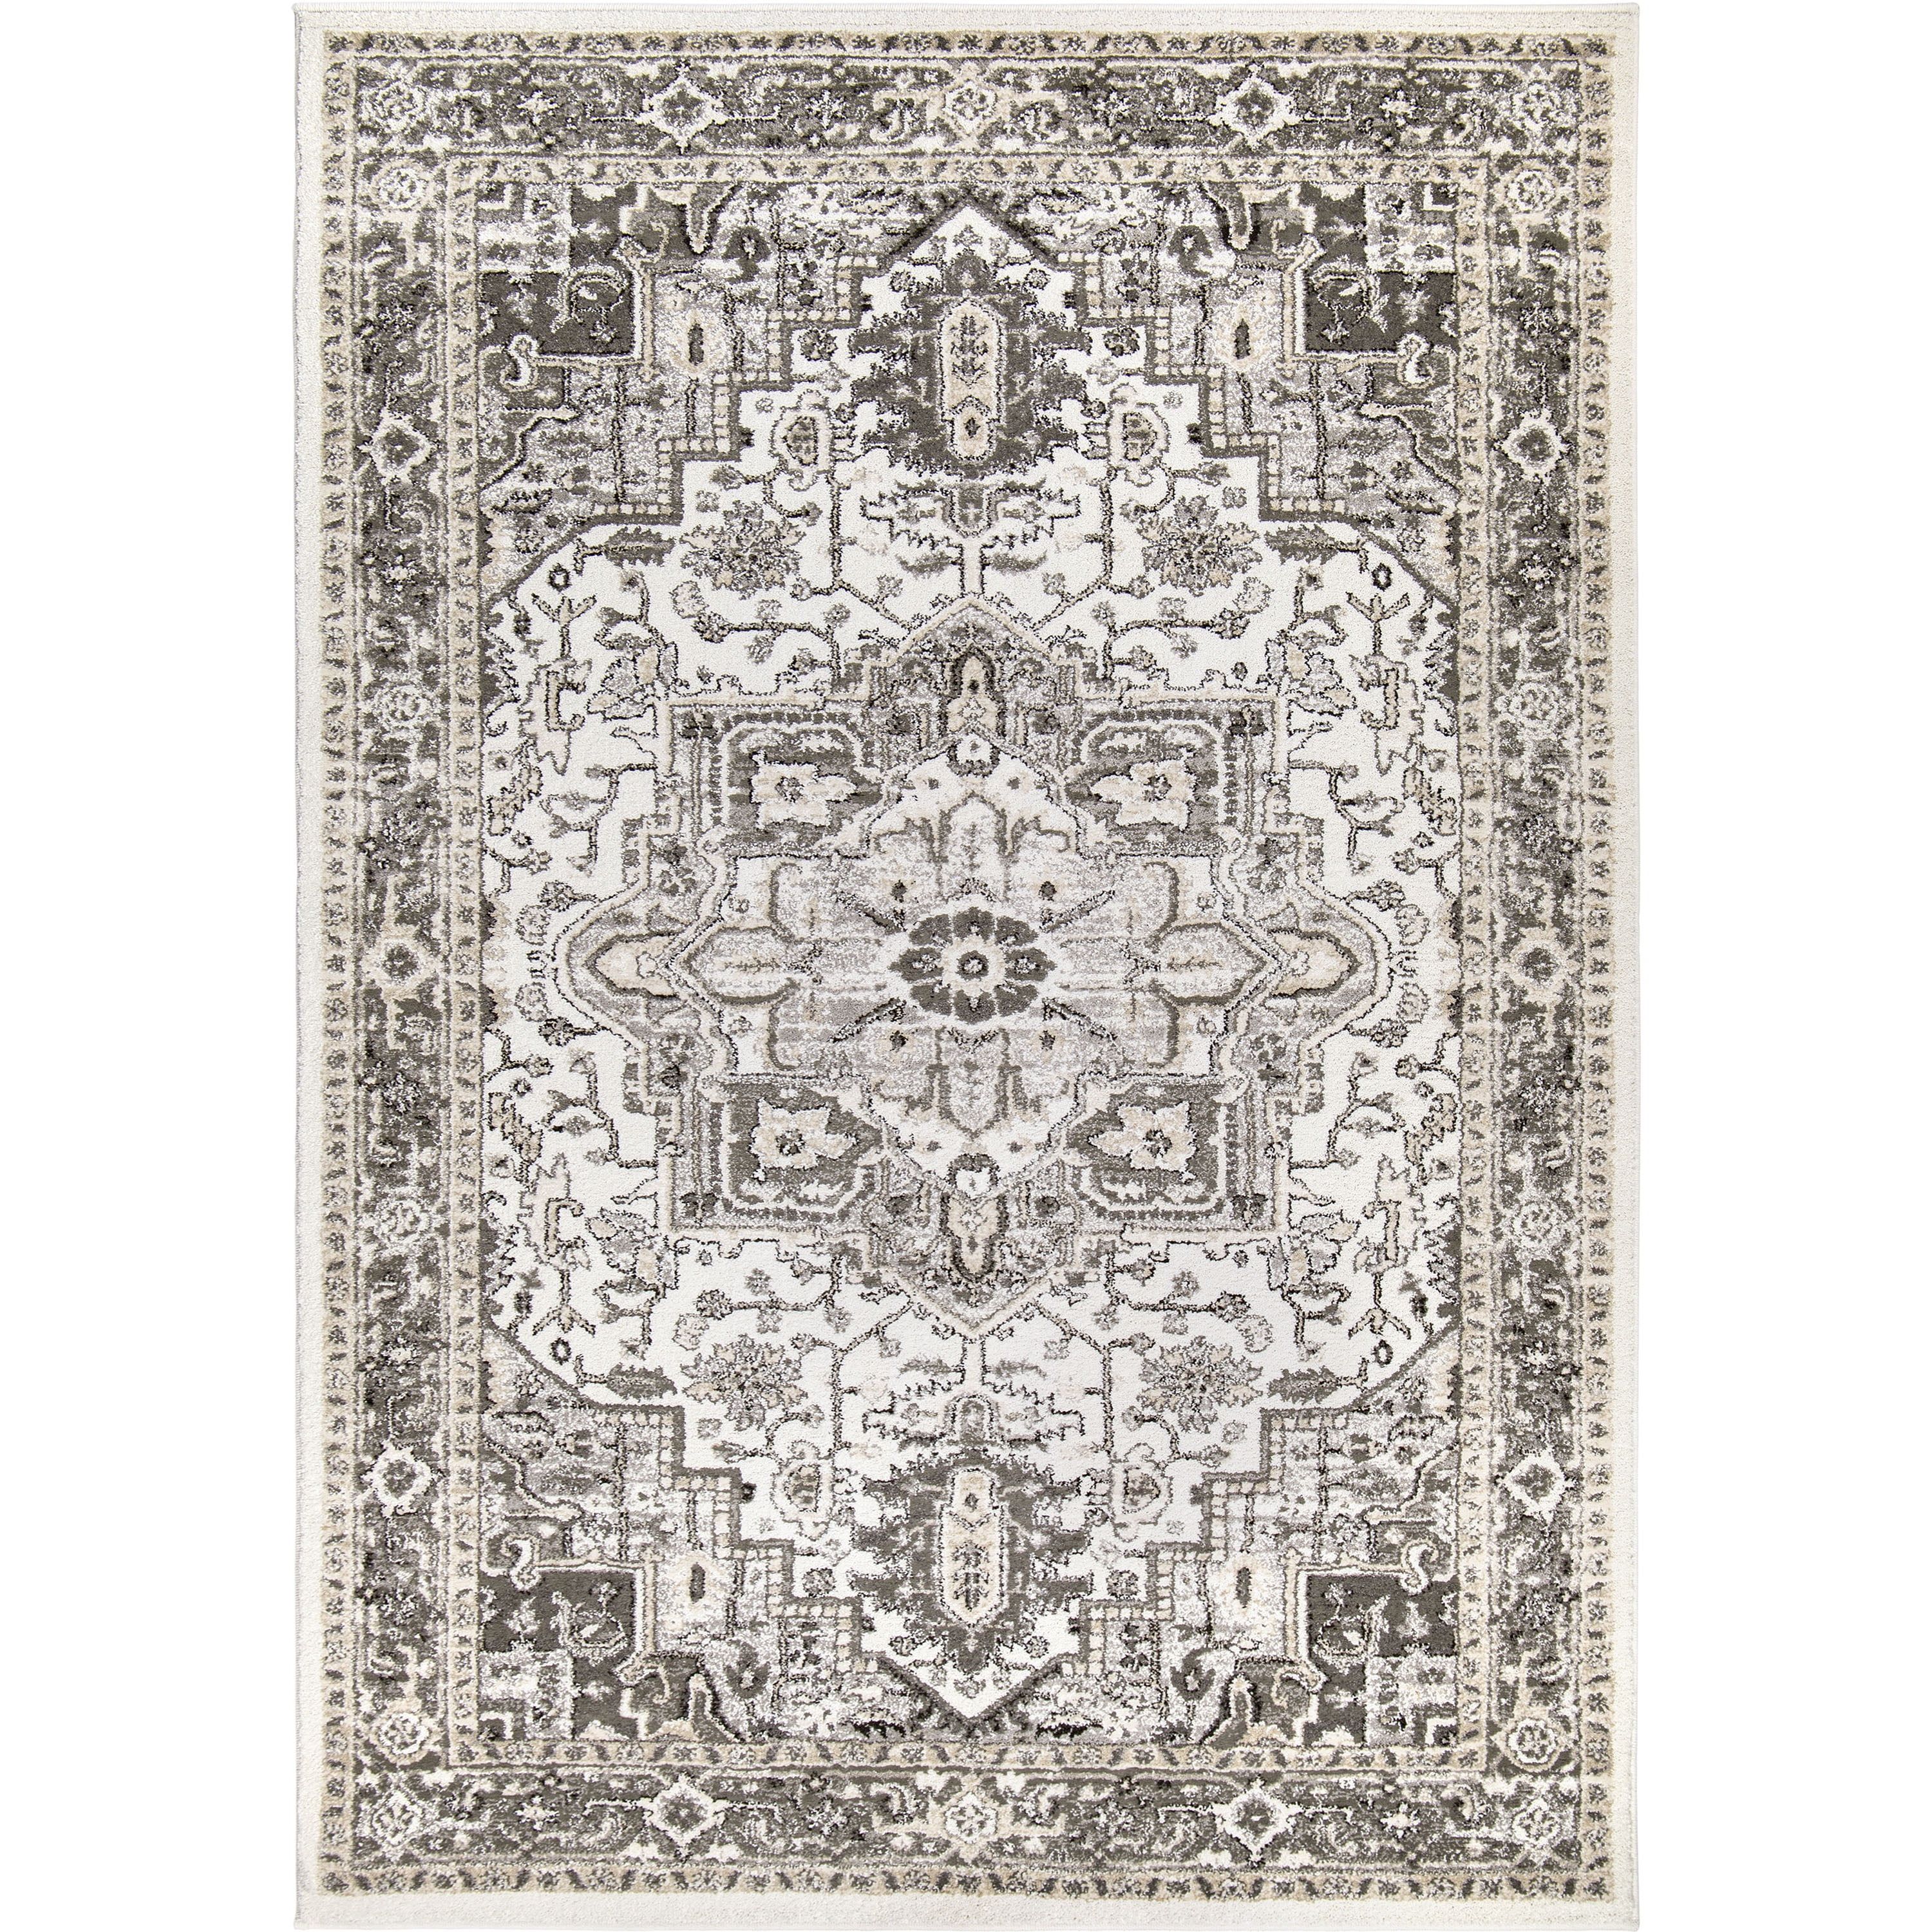 My Texas House Lone Star Belle, Floral Medallion Area Rug, Natural, 5'3" x 7'6" | Walmart (US)